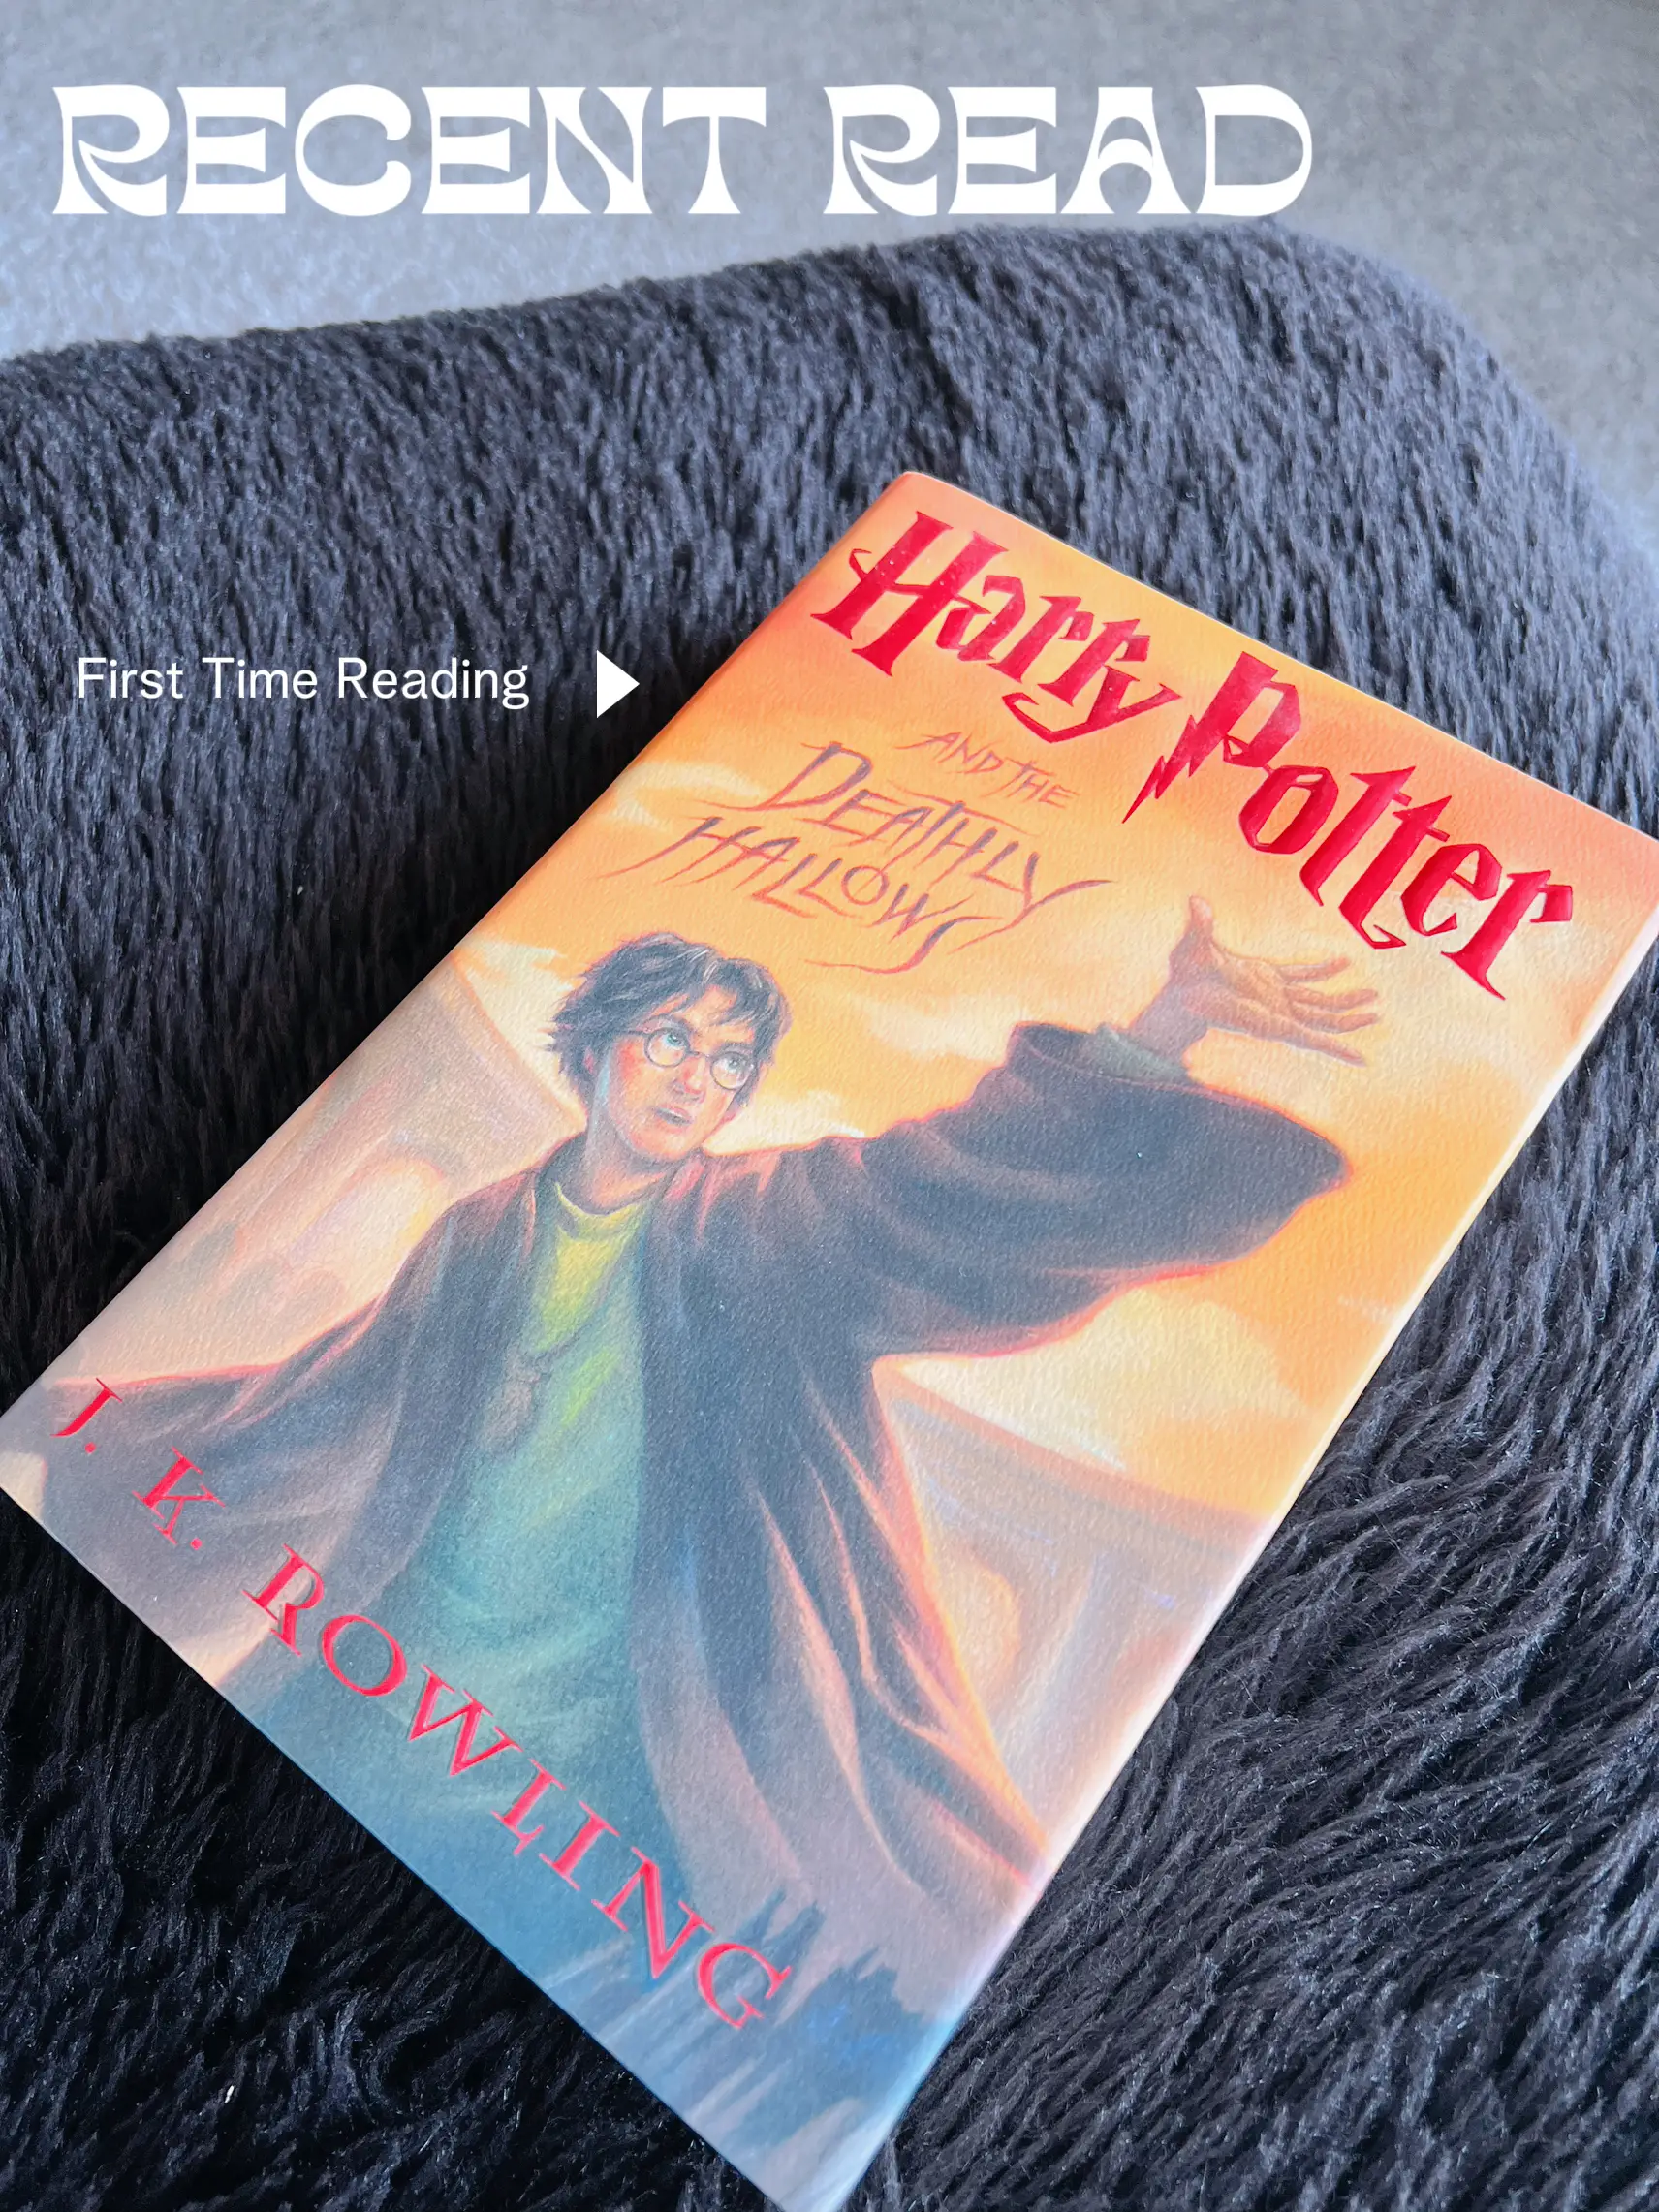 Hogwarts Legacy fans are obsessed with free Harry Potter RPG set after  Deathly Hallows